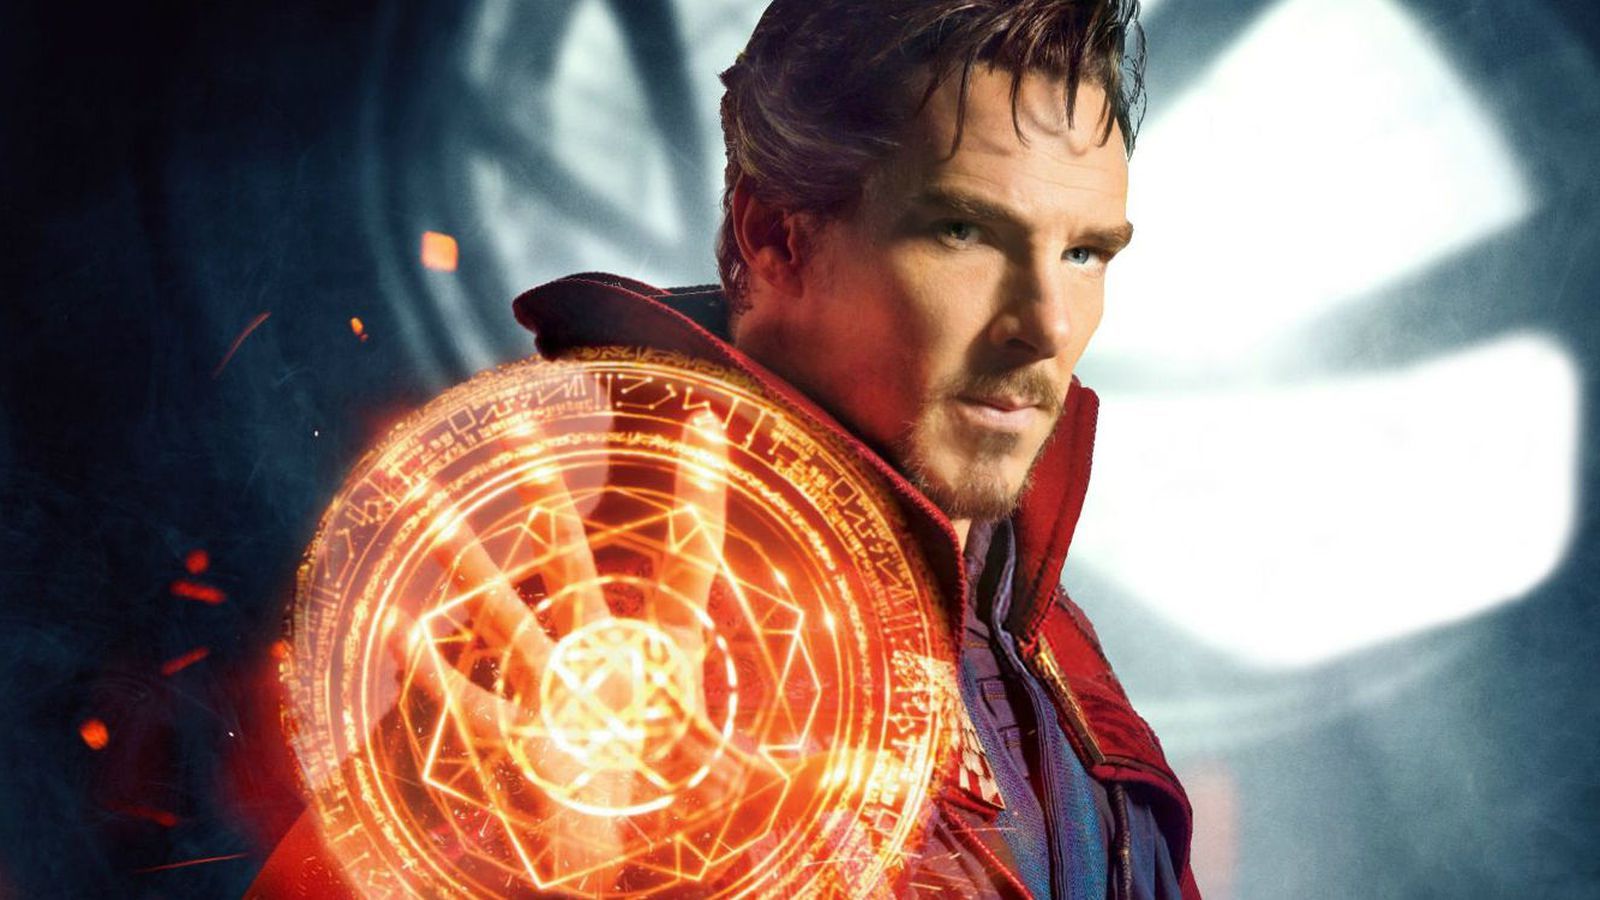 Doctor Strange's murky morality brings it close to being a